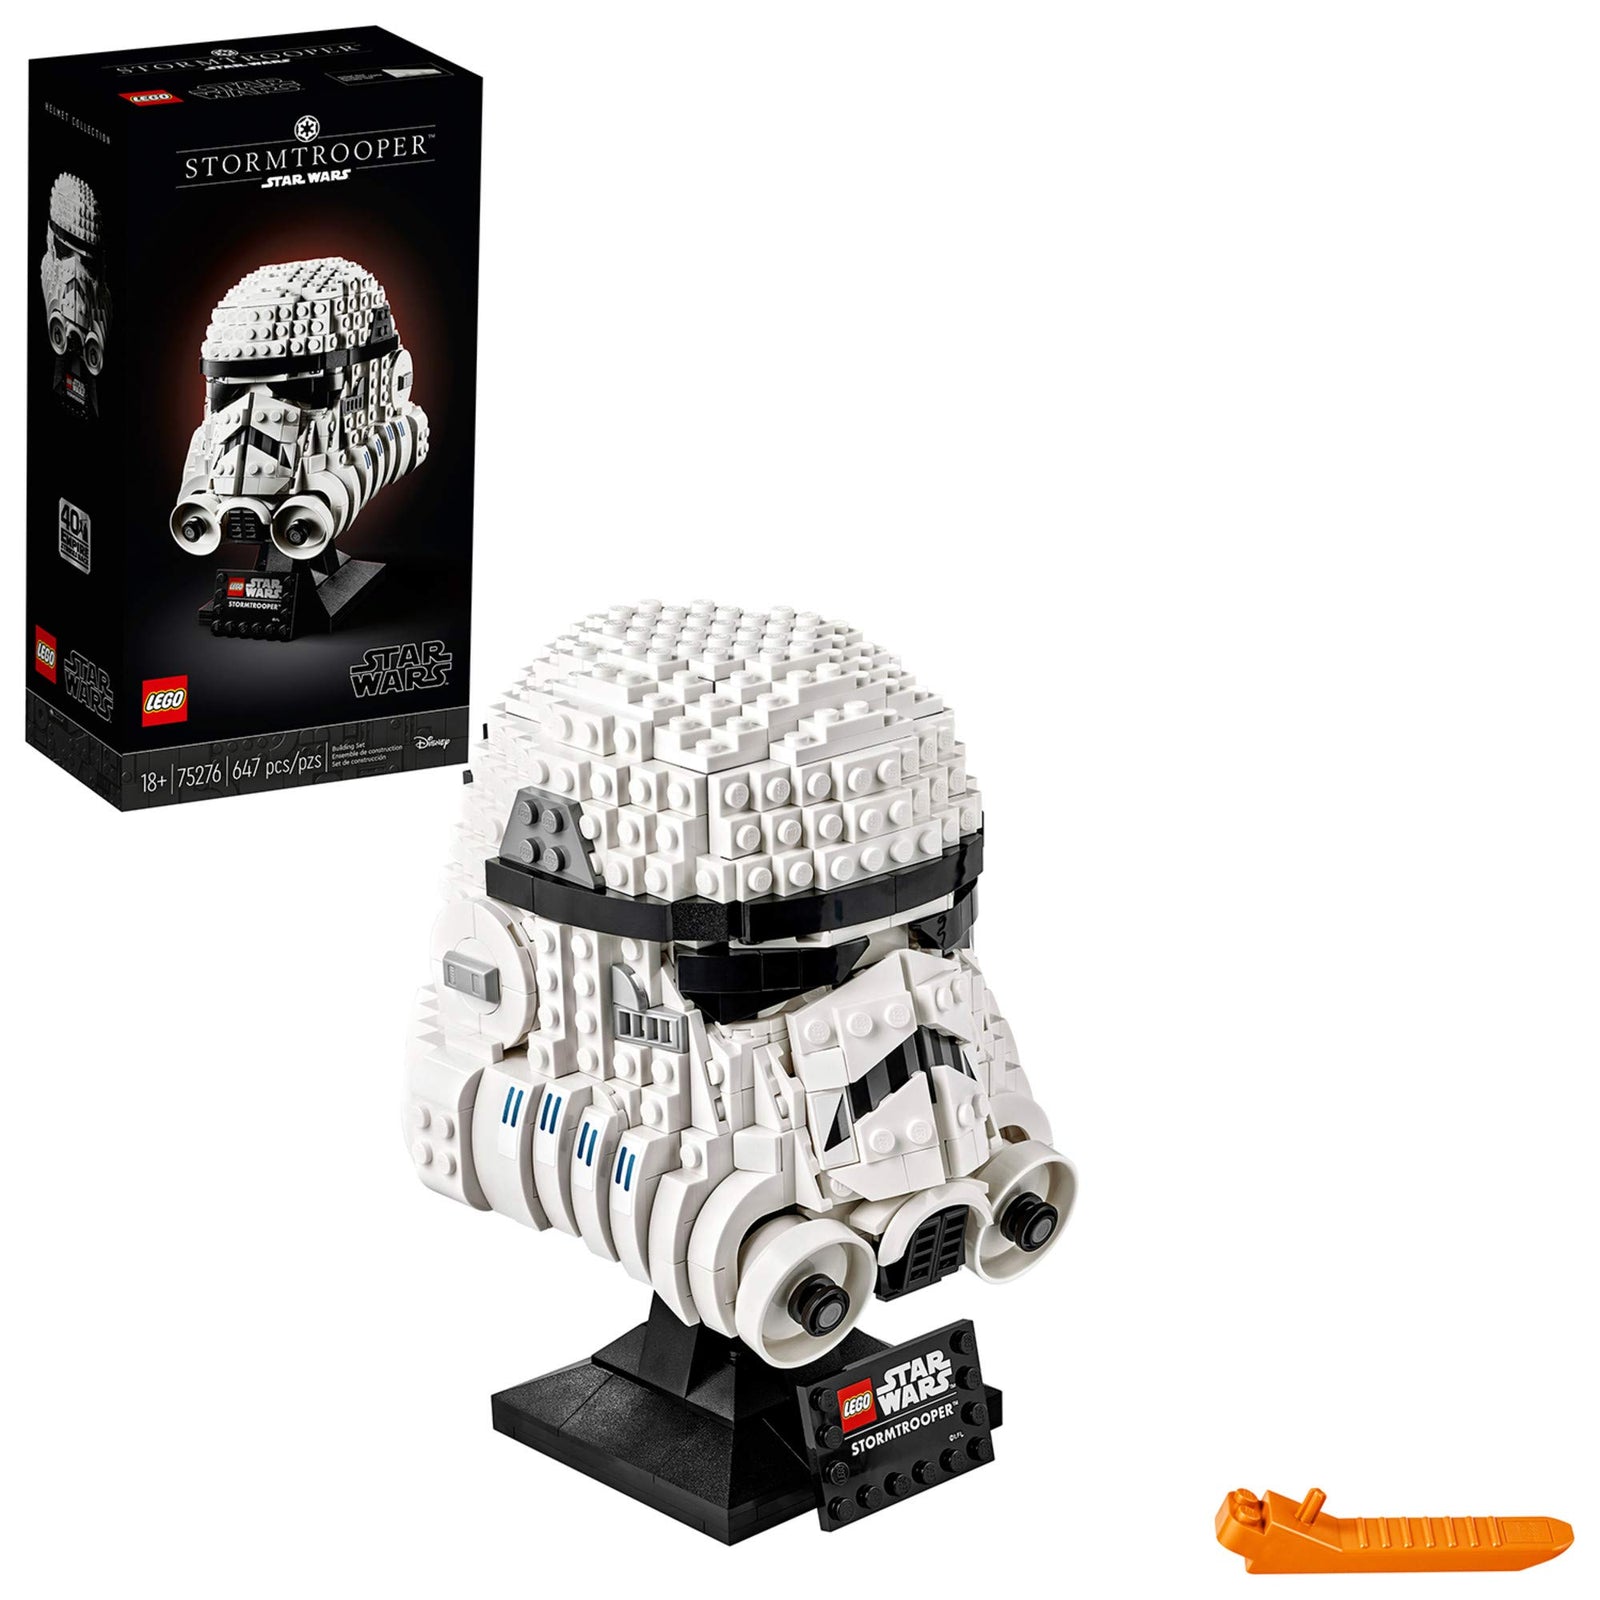 LEGO Star Wars Stormtrooper Helmet 75276 Building Kit, Cool Star Wars Collectible for Adults (647 Pieces)